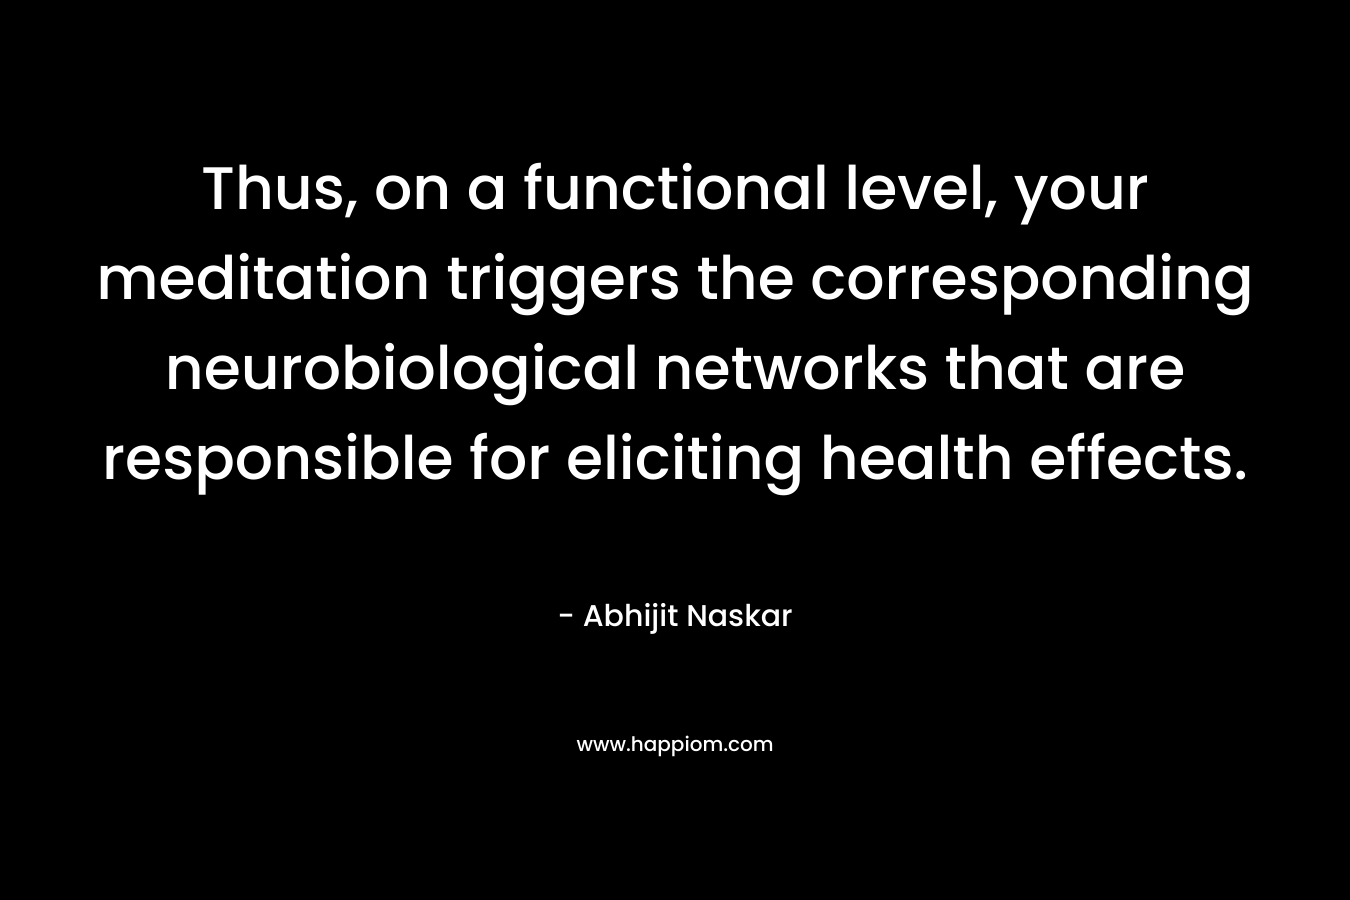 Thus, on a functional level, your meditation triggers the corresponding neurobiological networks that are responsible for eliciting health effects. – Abhijit Naskar